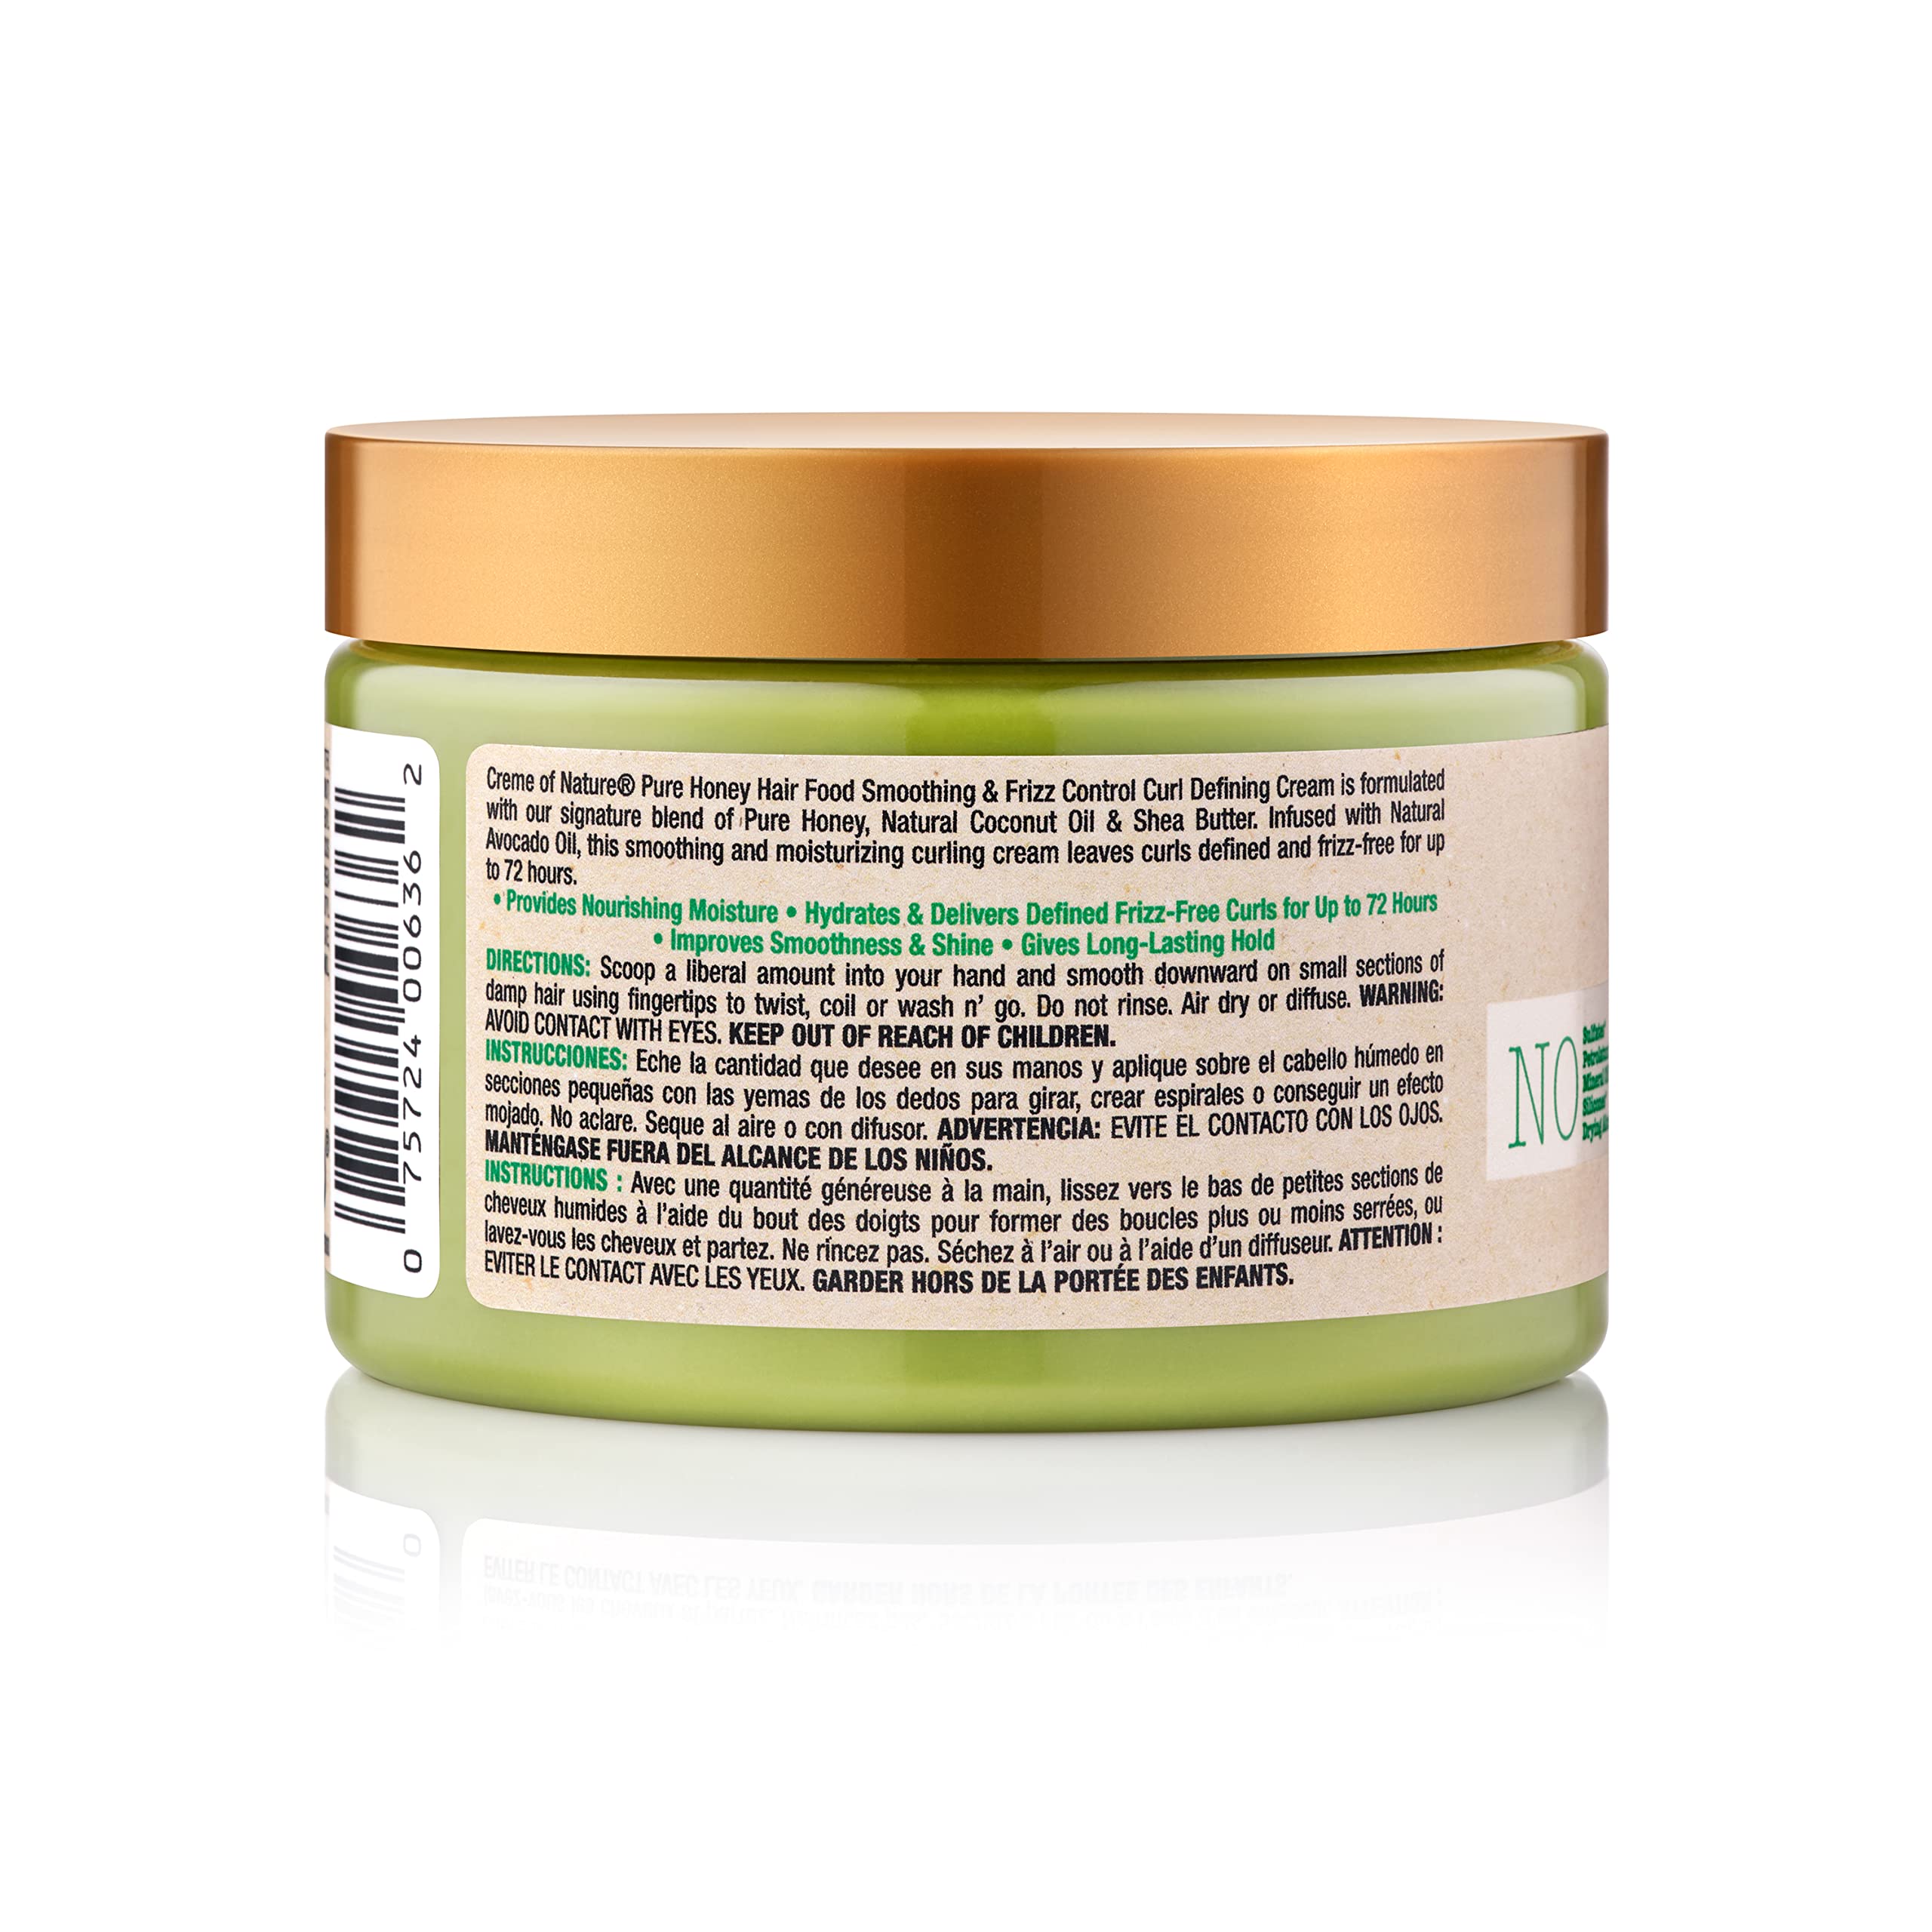 Avocado Hair Cream by Creme of Nature, Curl Cream for Curly Hair, Honey and Avocado Collection, 11.5 Oz